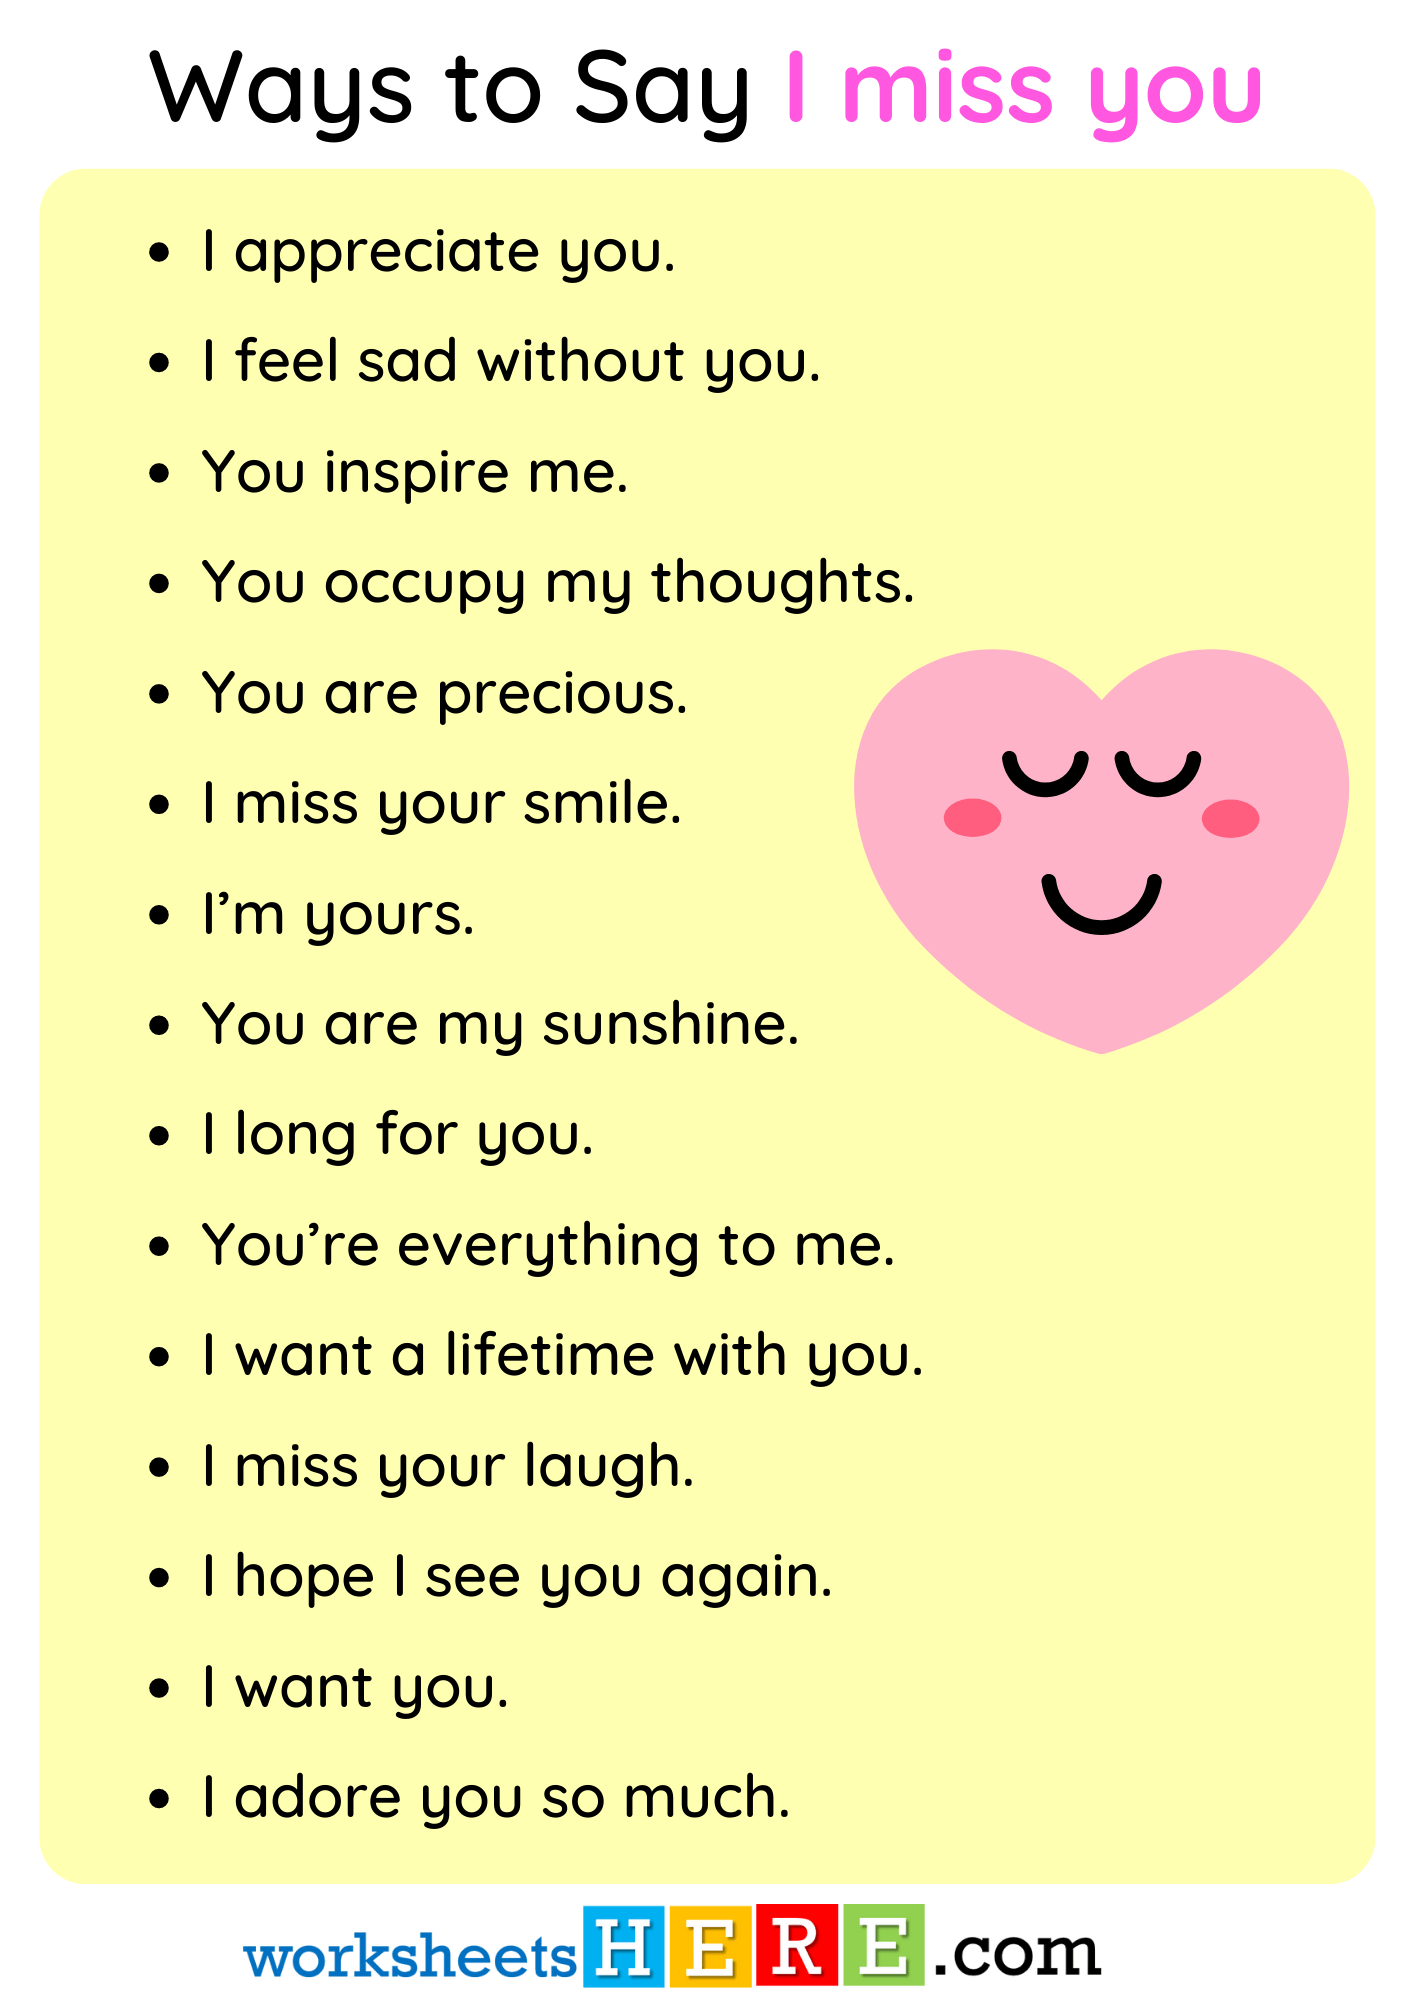 Ways to Say I miss you in Speaking PDF Worksheet For Students